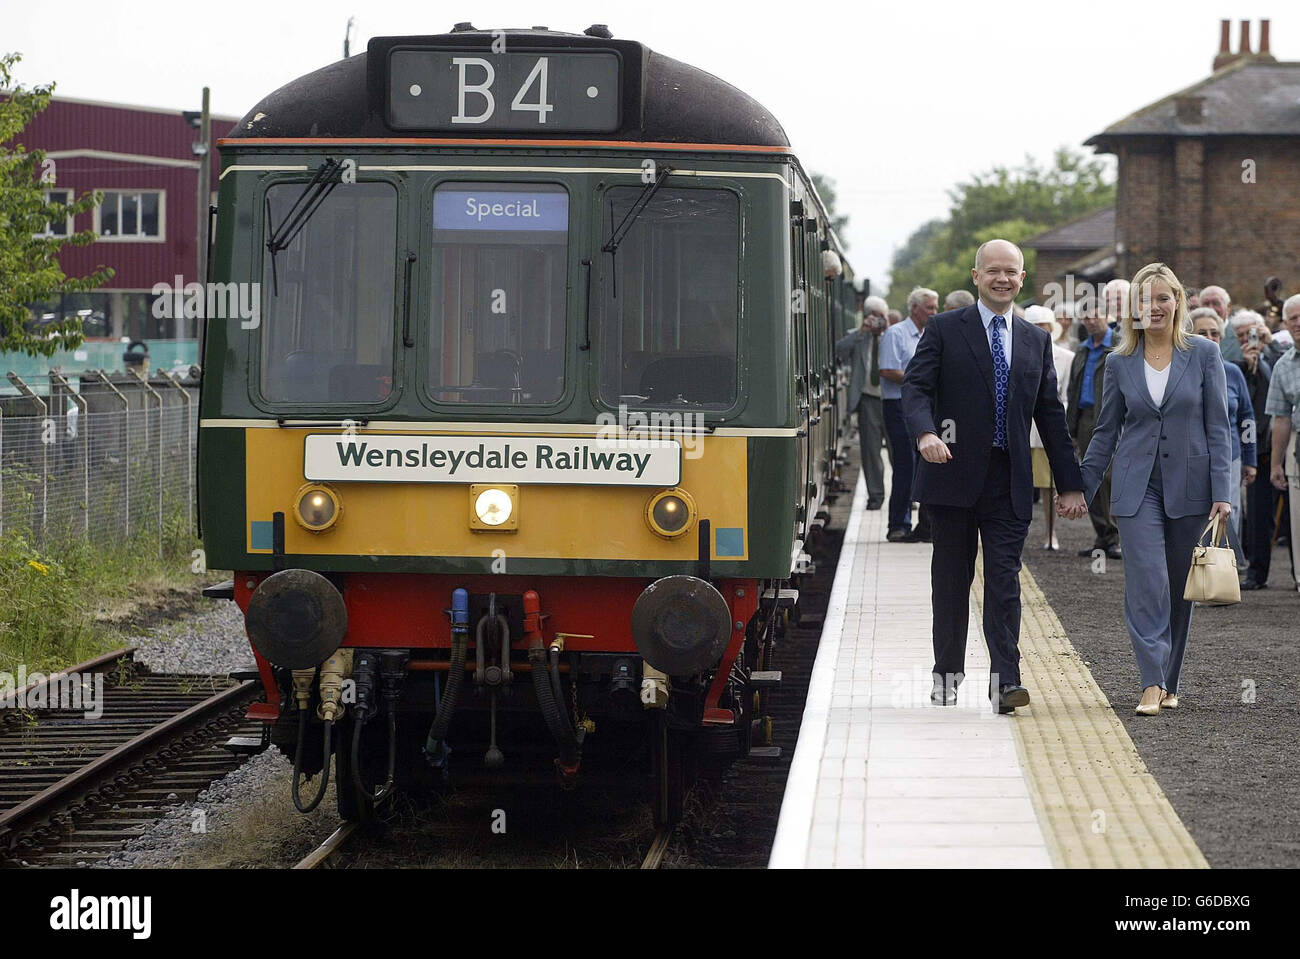 Former Conservative leader William Hague and his wife Ffion take a stroll along the platform after reopening the Wensleydale line, in Richmondshire. * The line has not been used by passengers for half a century, but from today services will run between Leeming Bar and Leyburn. The Rail Regulator has granted five licences to Wensleydale Railway which covers the management of 22 miles of track and infrastructure between Northallerton and Redmire, operation of stations, passenger trains, freight trains and train maintenance. Stock Photo